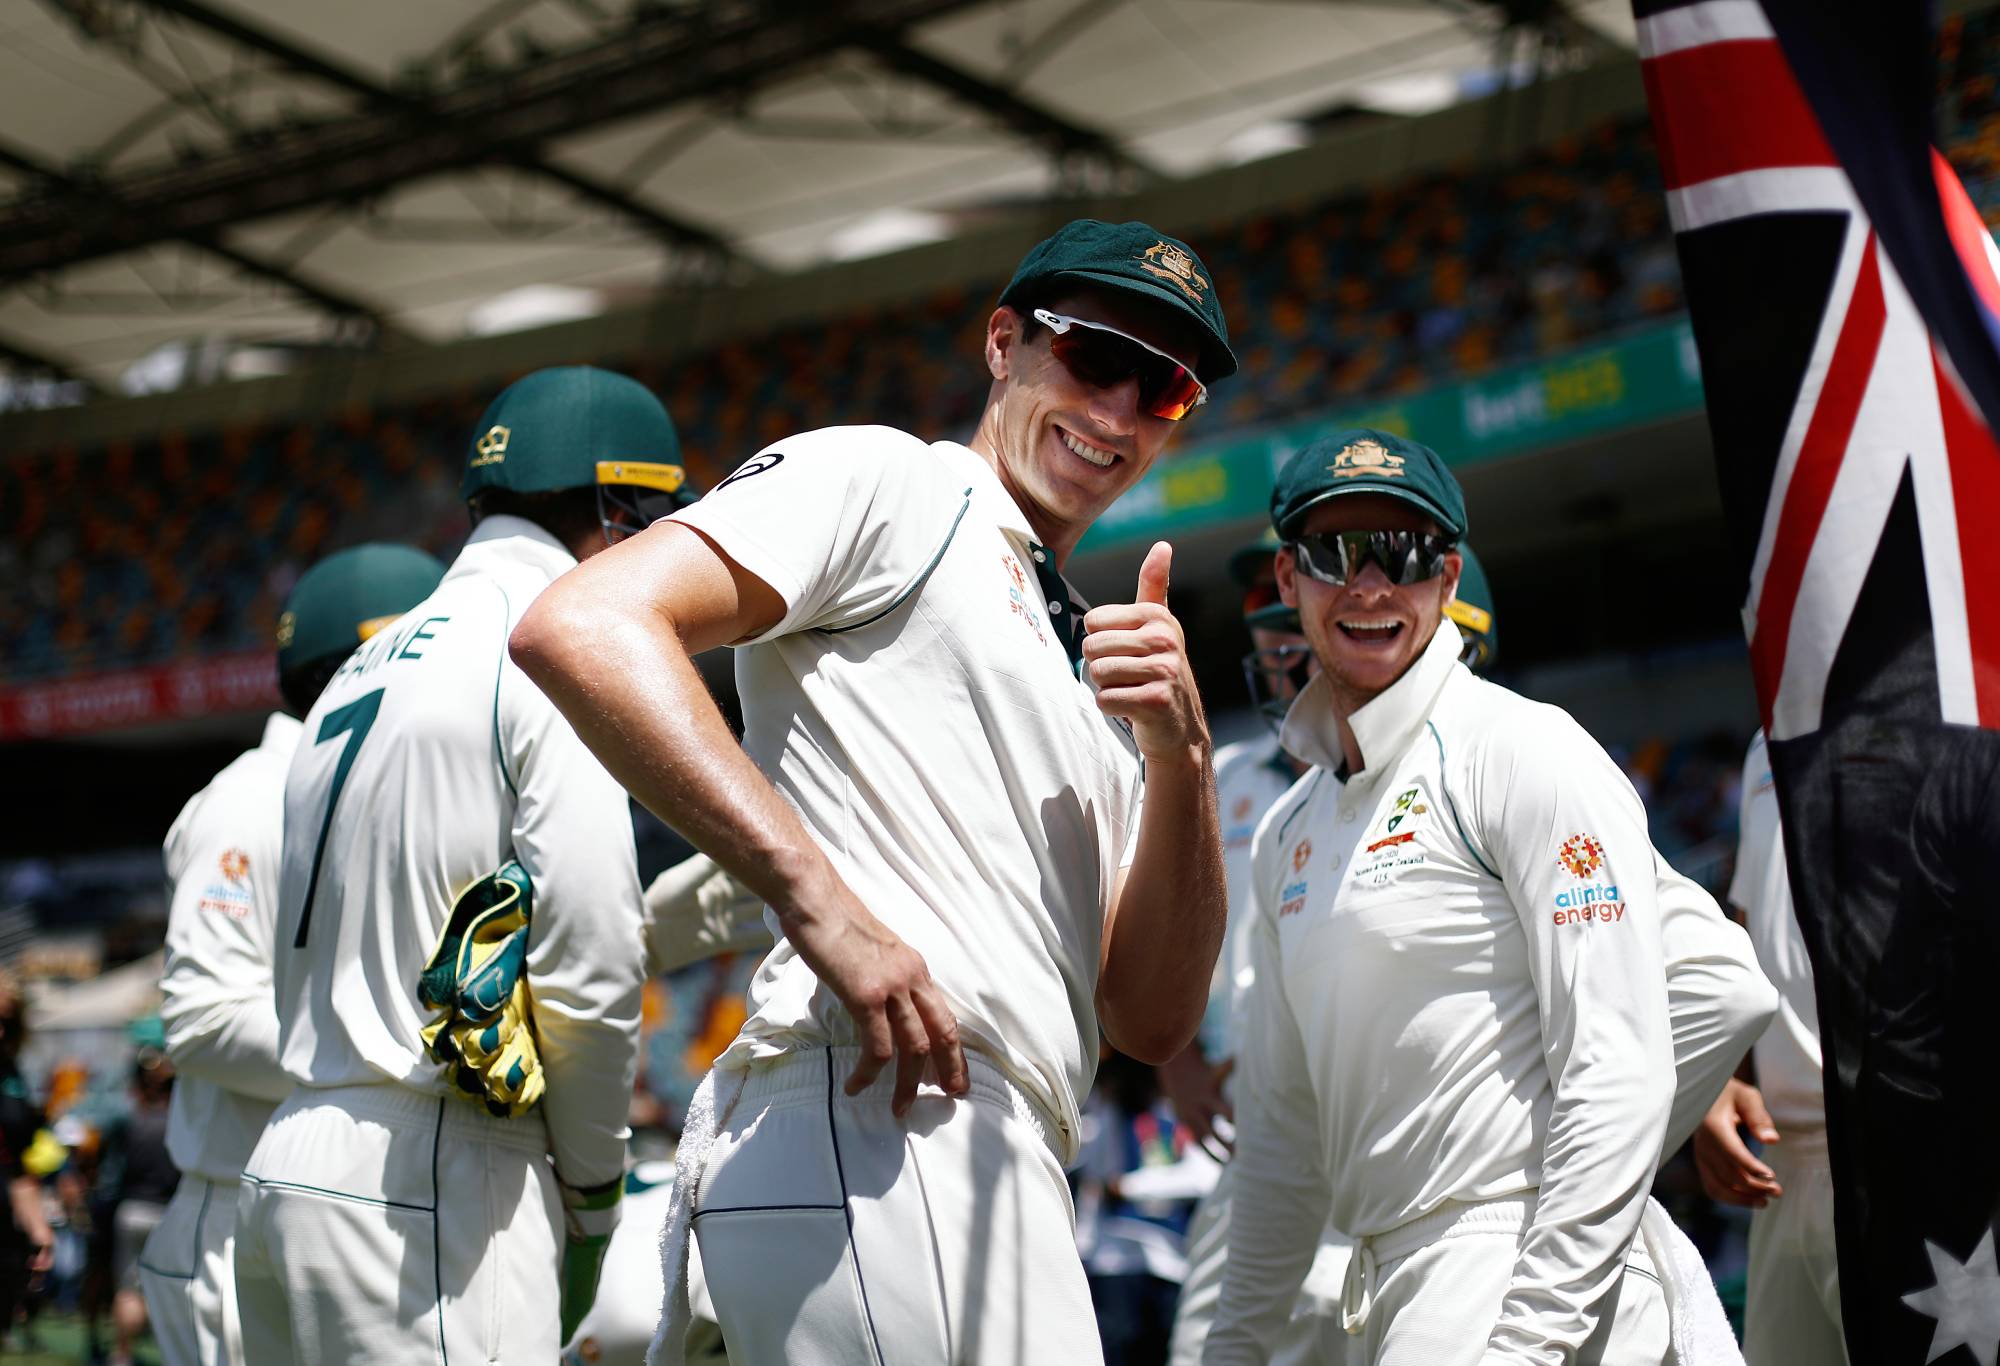 Pat Cummins and Steve Smith of Australia walk out to field during day four of the 1st Domain Test between Australia and Pakistan at The Gabba on November 24, 2019 in Brisbane, Australia. (Photo by Ryan Pierse/Getty Images)